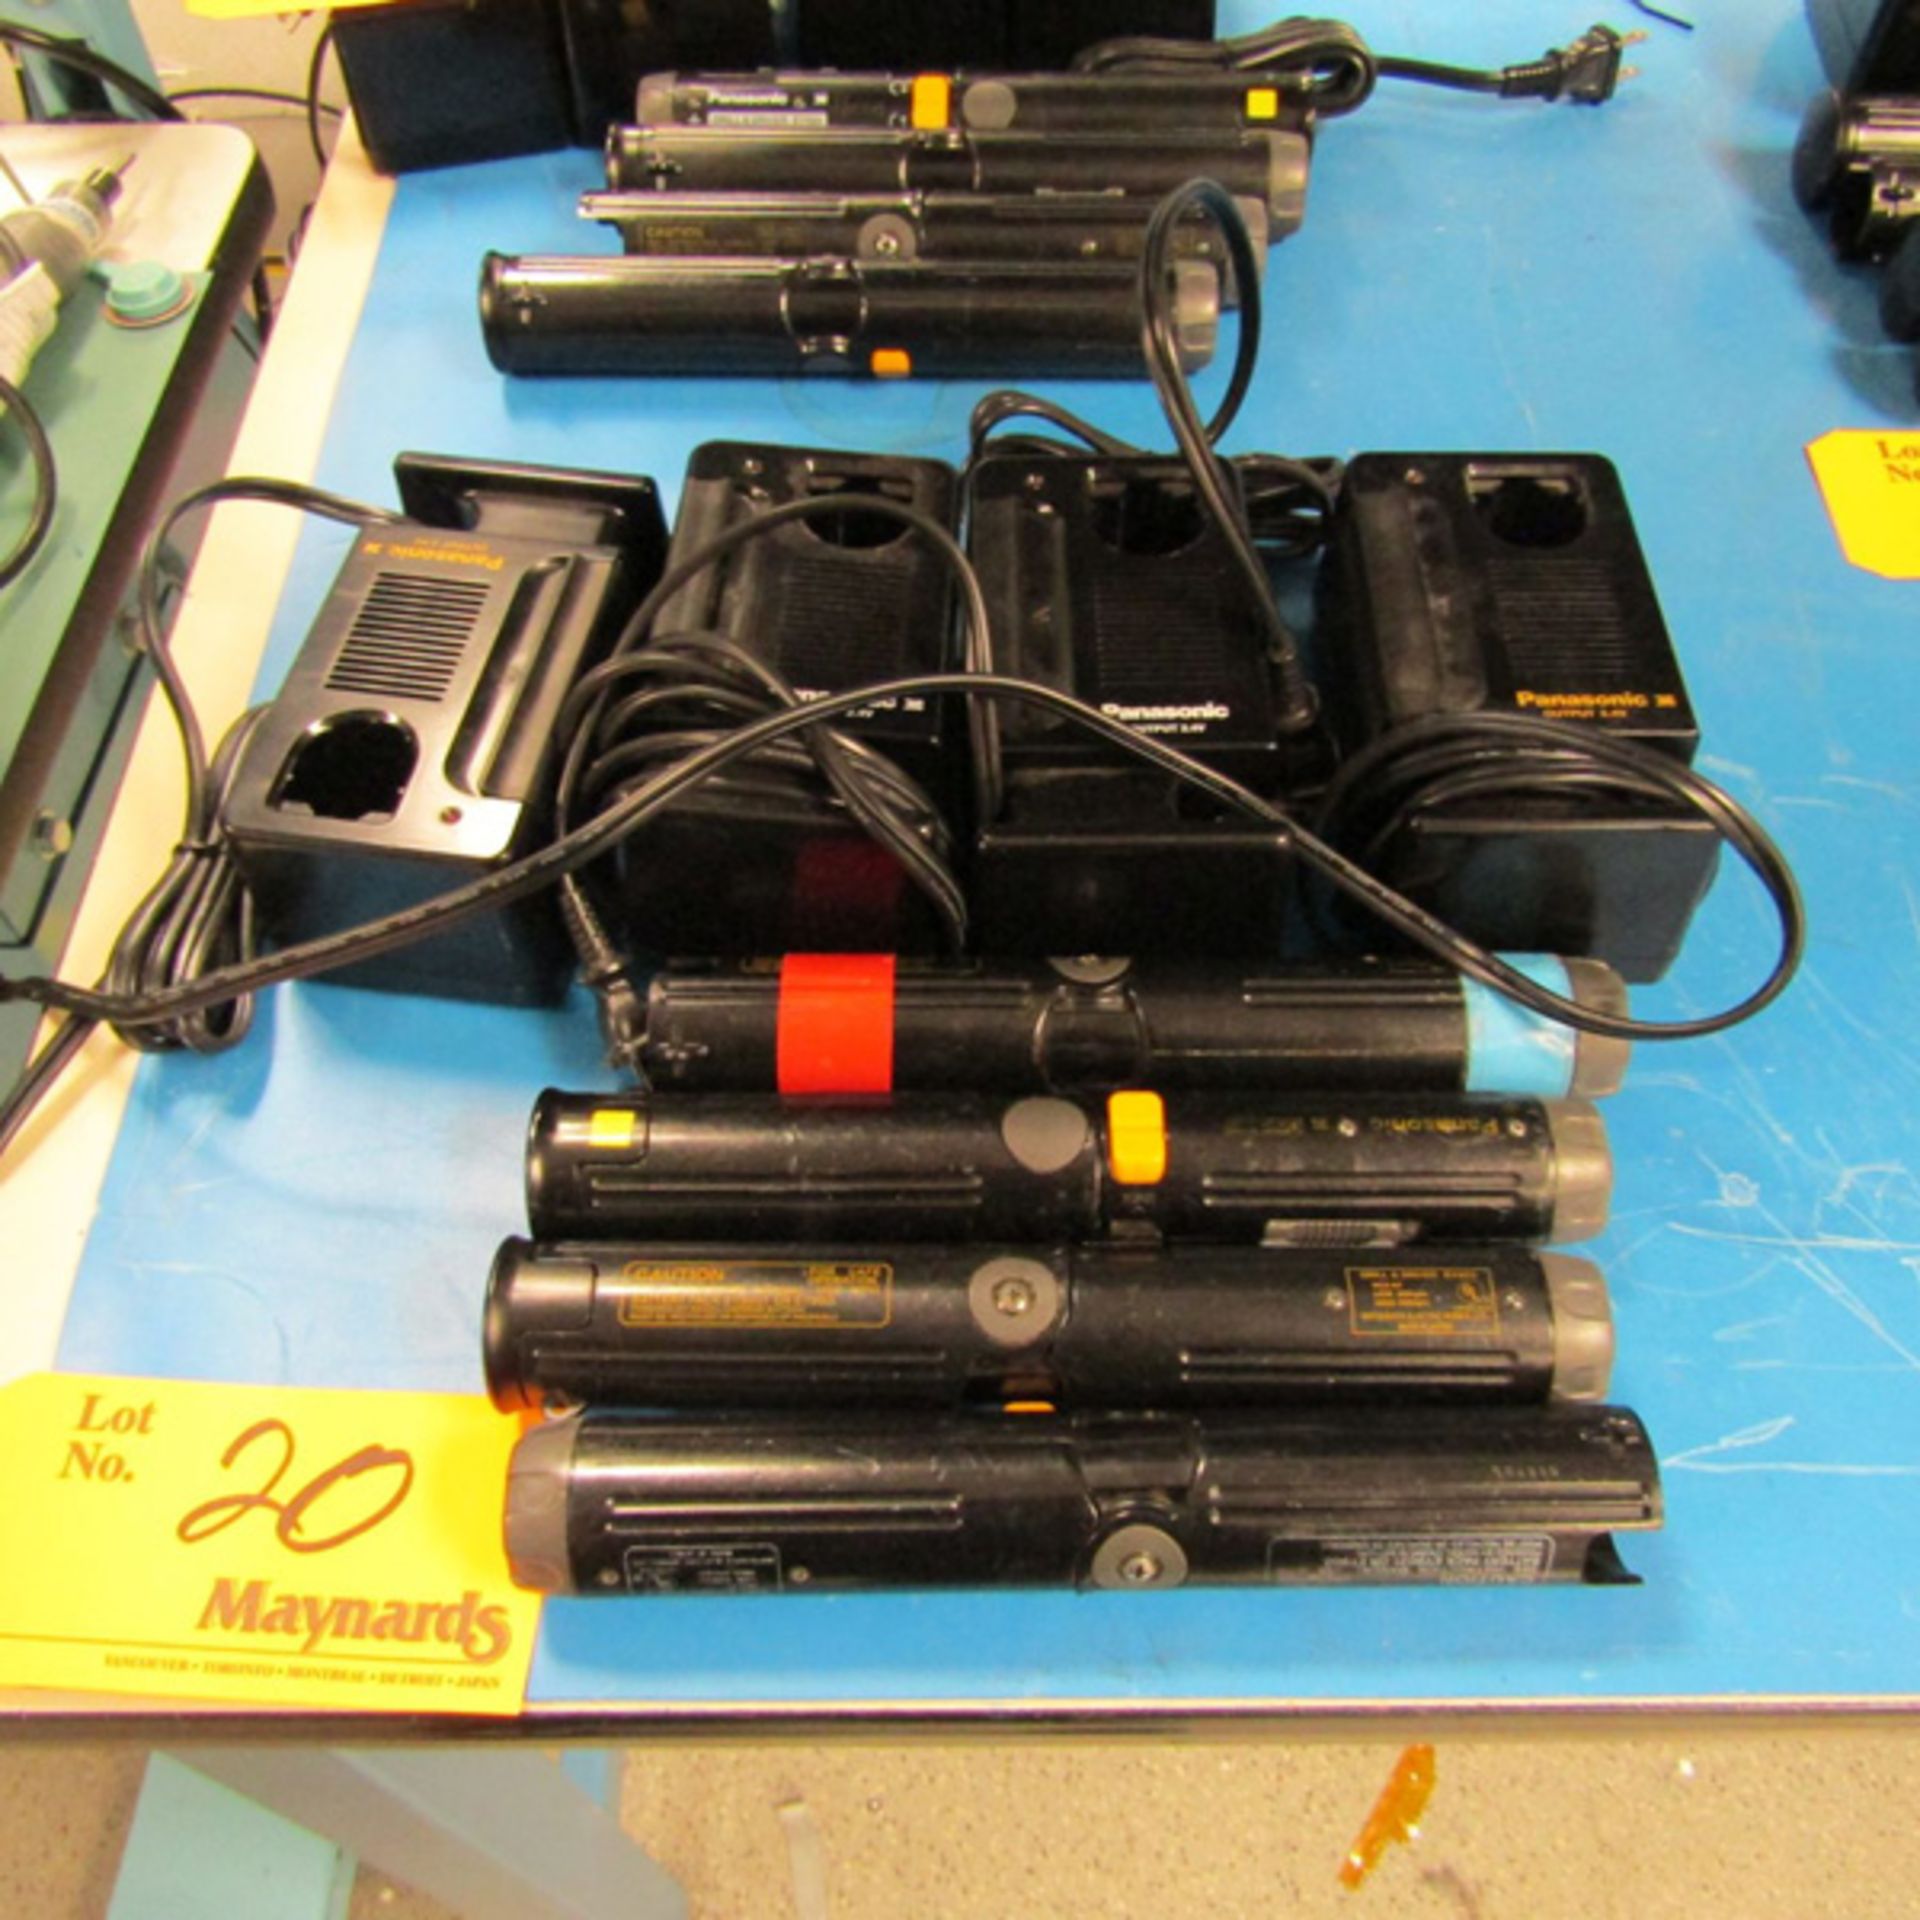 Panasonic Model: EY503 (4) Drill Drivers with (4) Chargers Location: Quantum